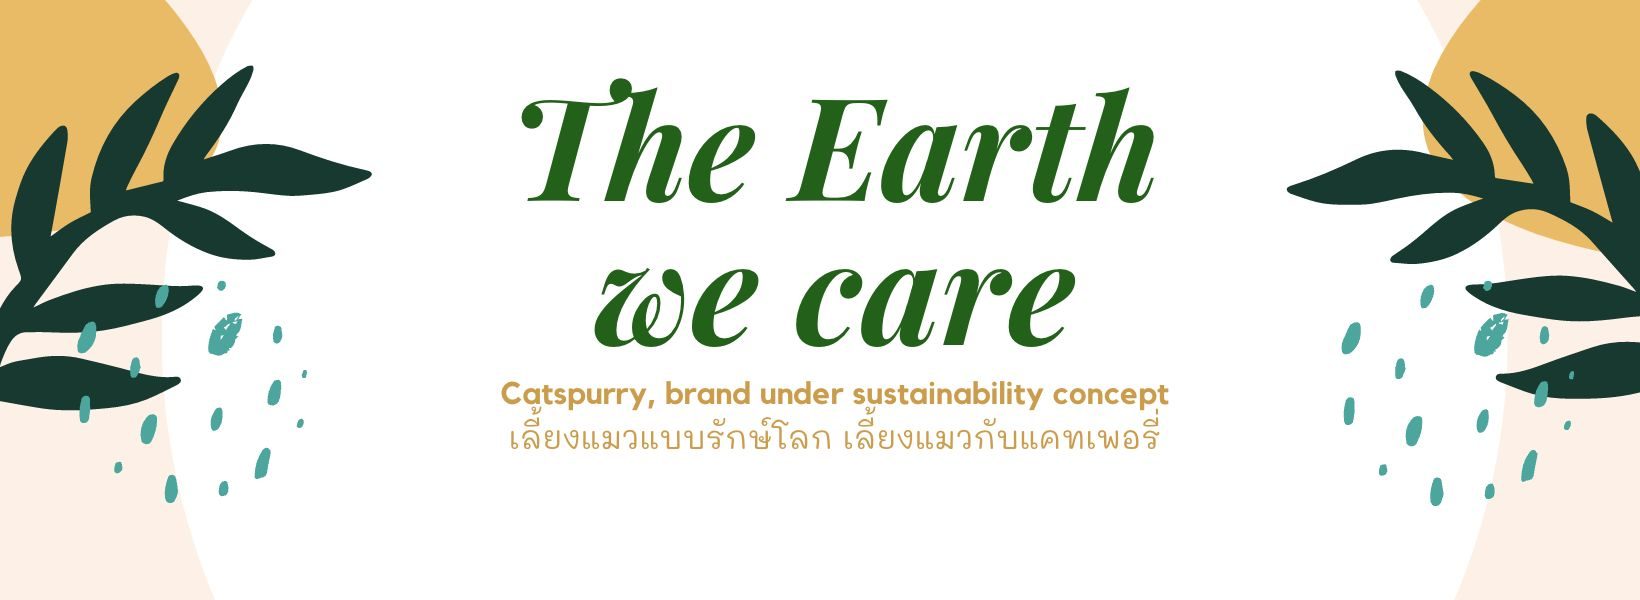 Catspurry sustainable concept